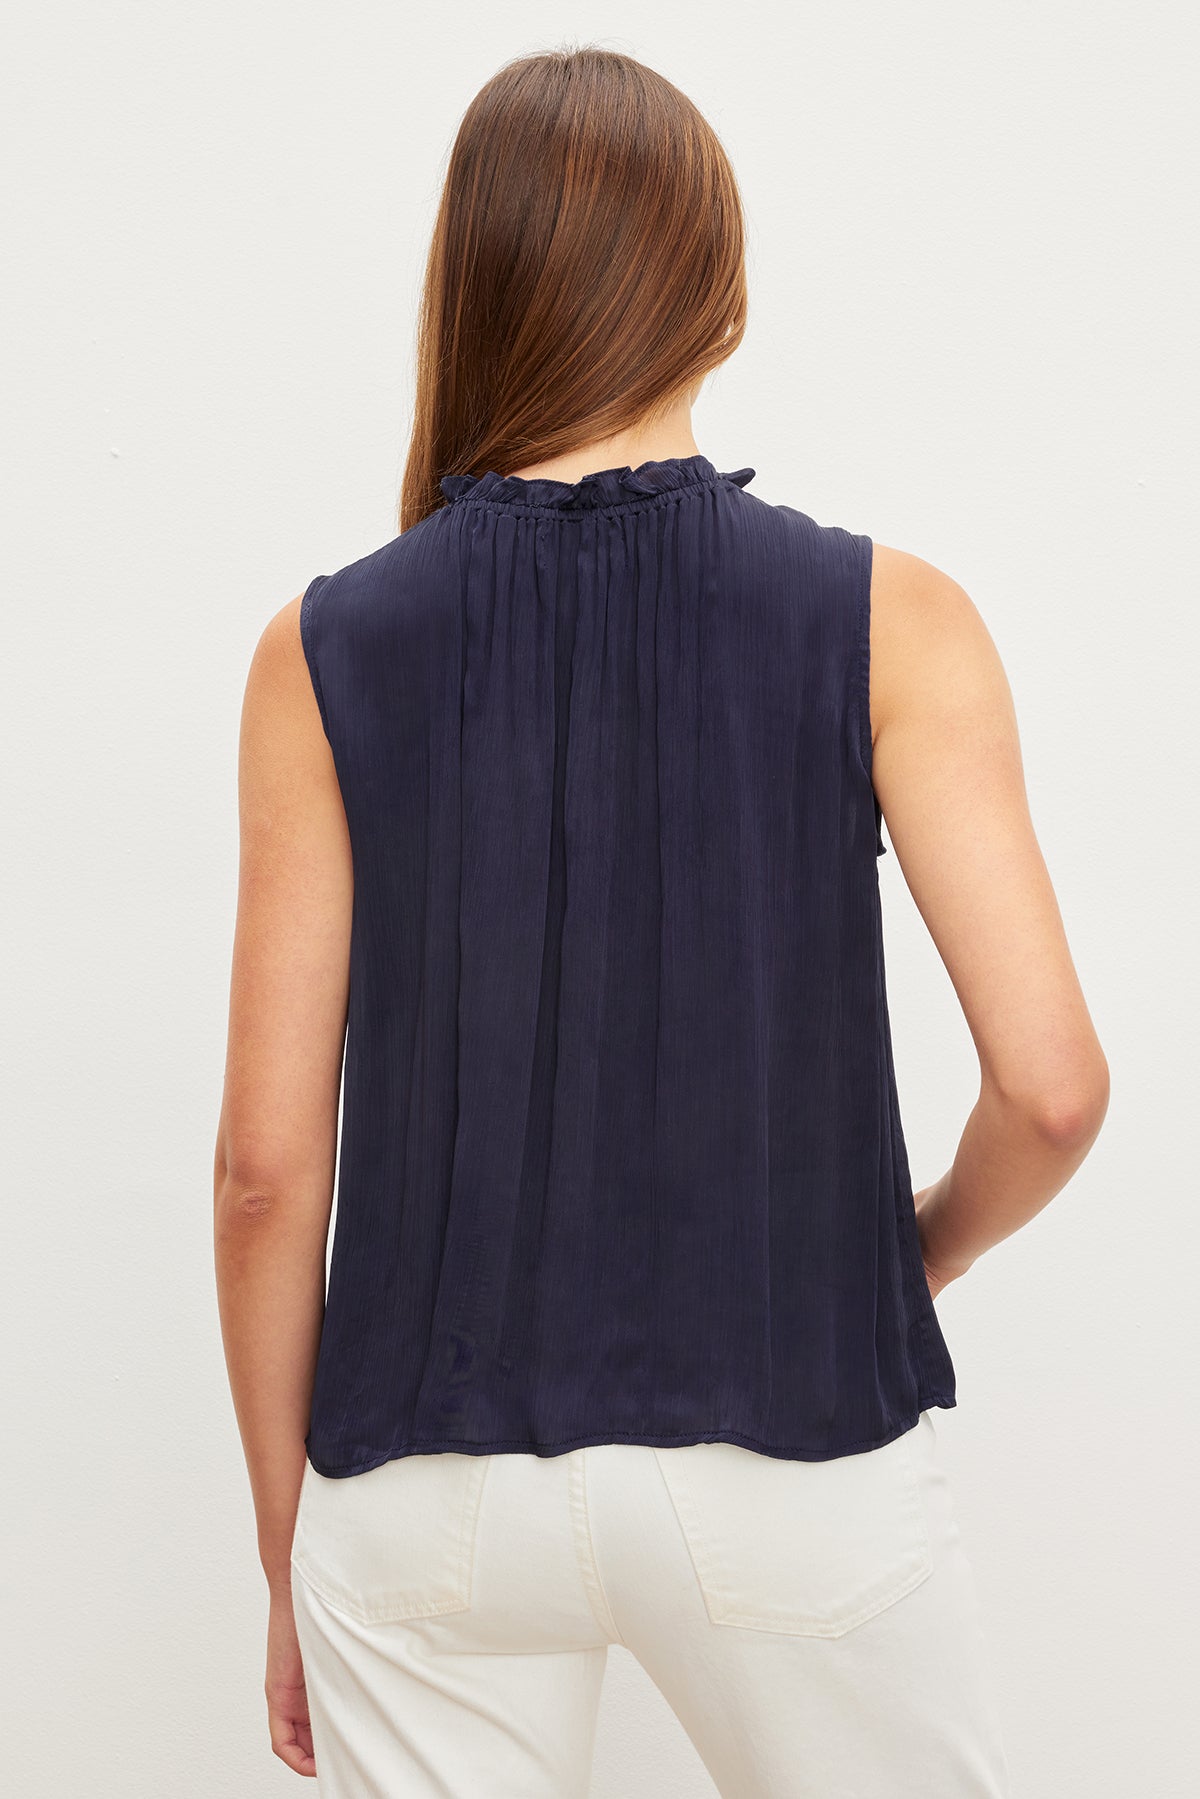 Woman seen from behind, wearing a navy KIANA RUFFLE NECK TANK TOP by Velvet by Graham & Spencer and white pants, standing against a neutral background.-36409583665345